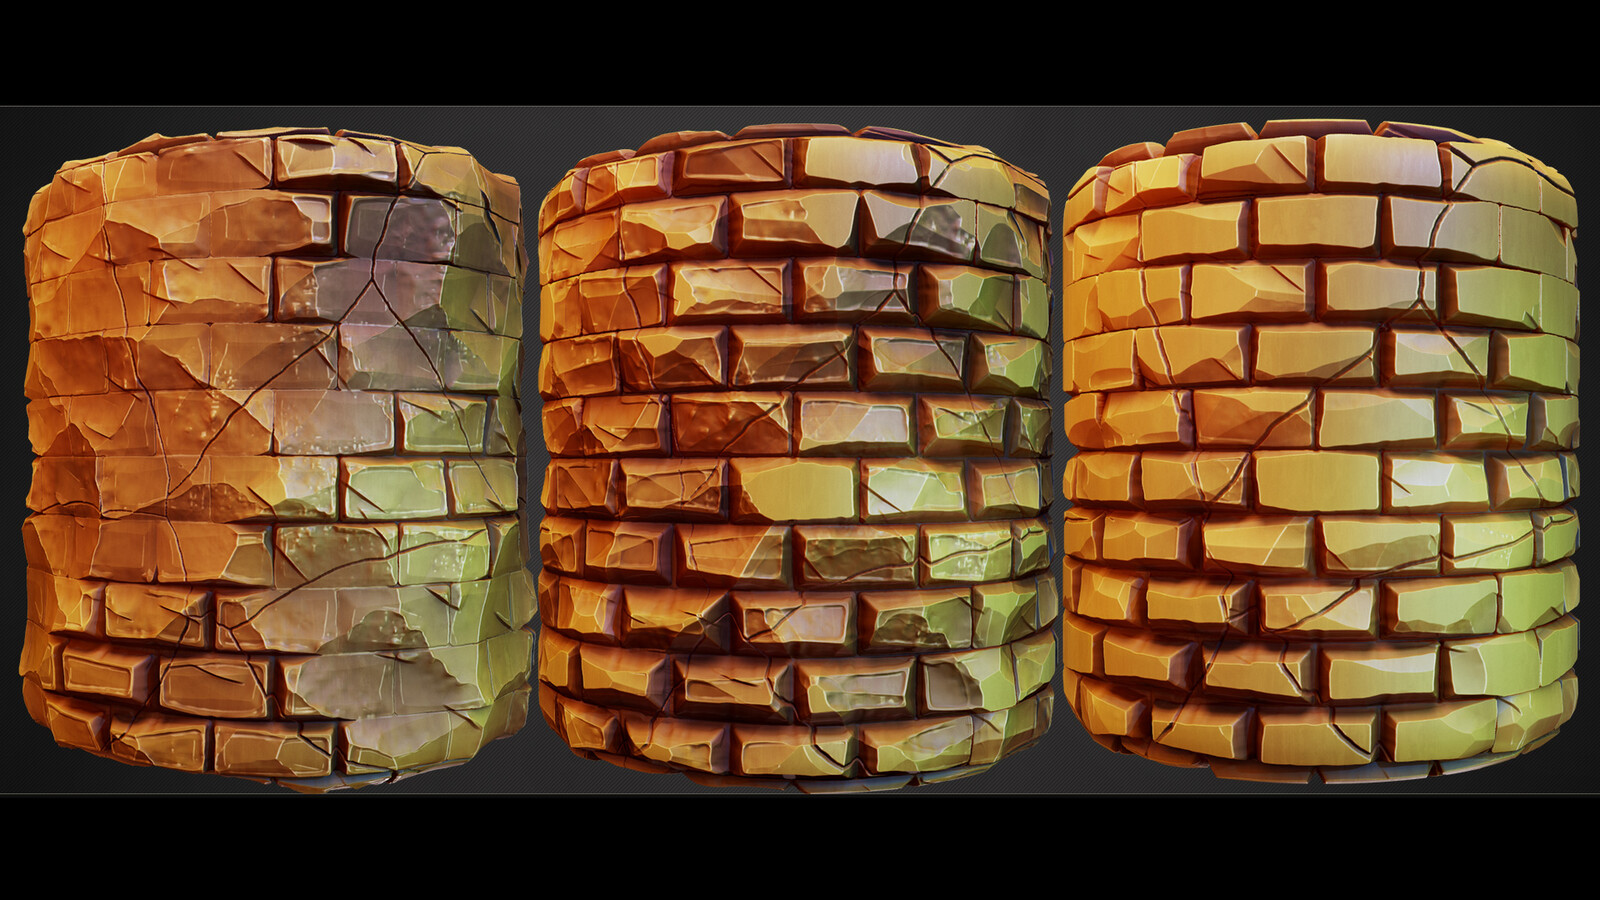 One blend node changes the style of the cracked bricks.